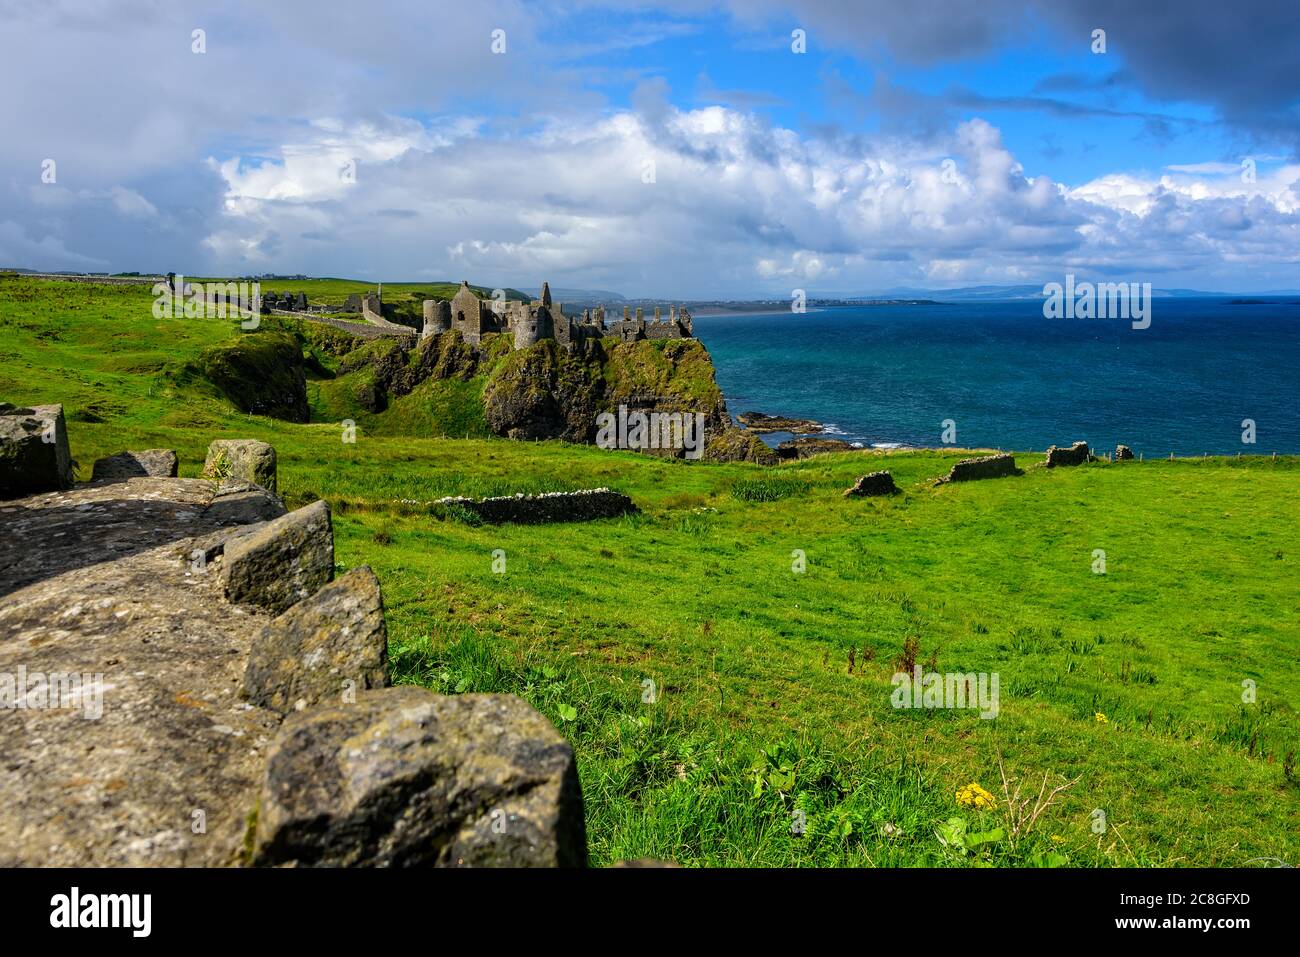 The structural remains of the ruined Dunluce Castle in Northern Ireland Stock Photo